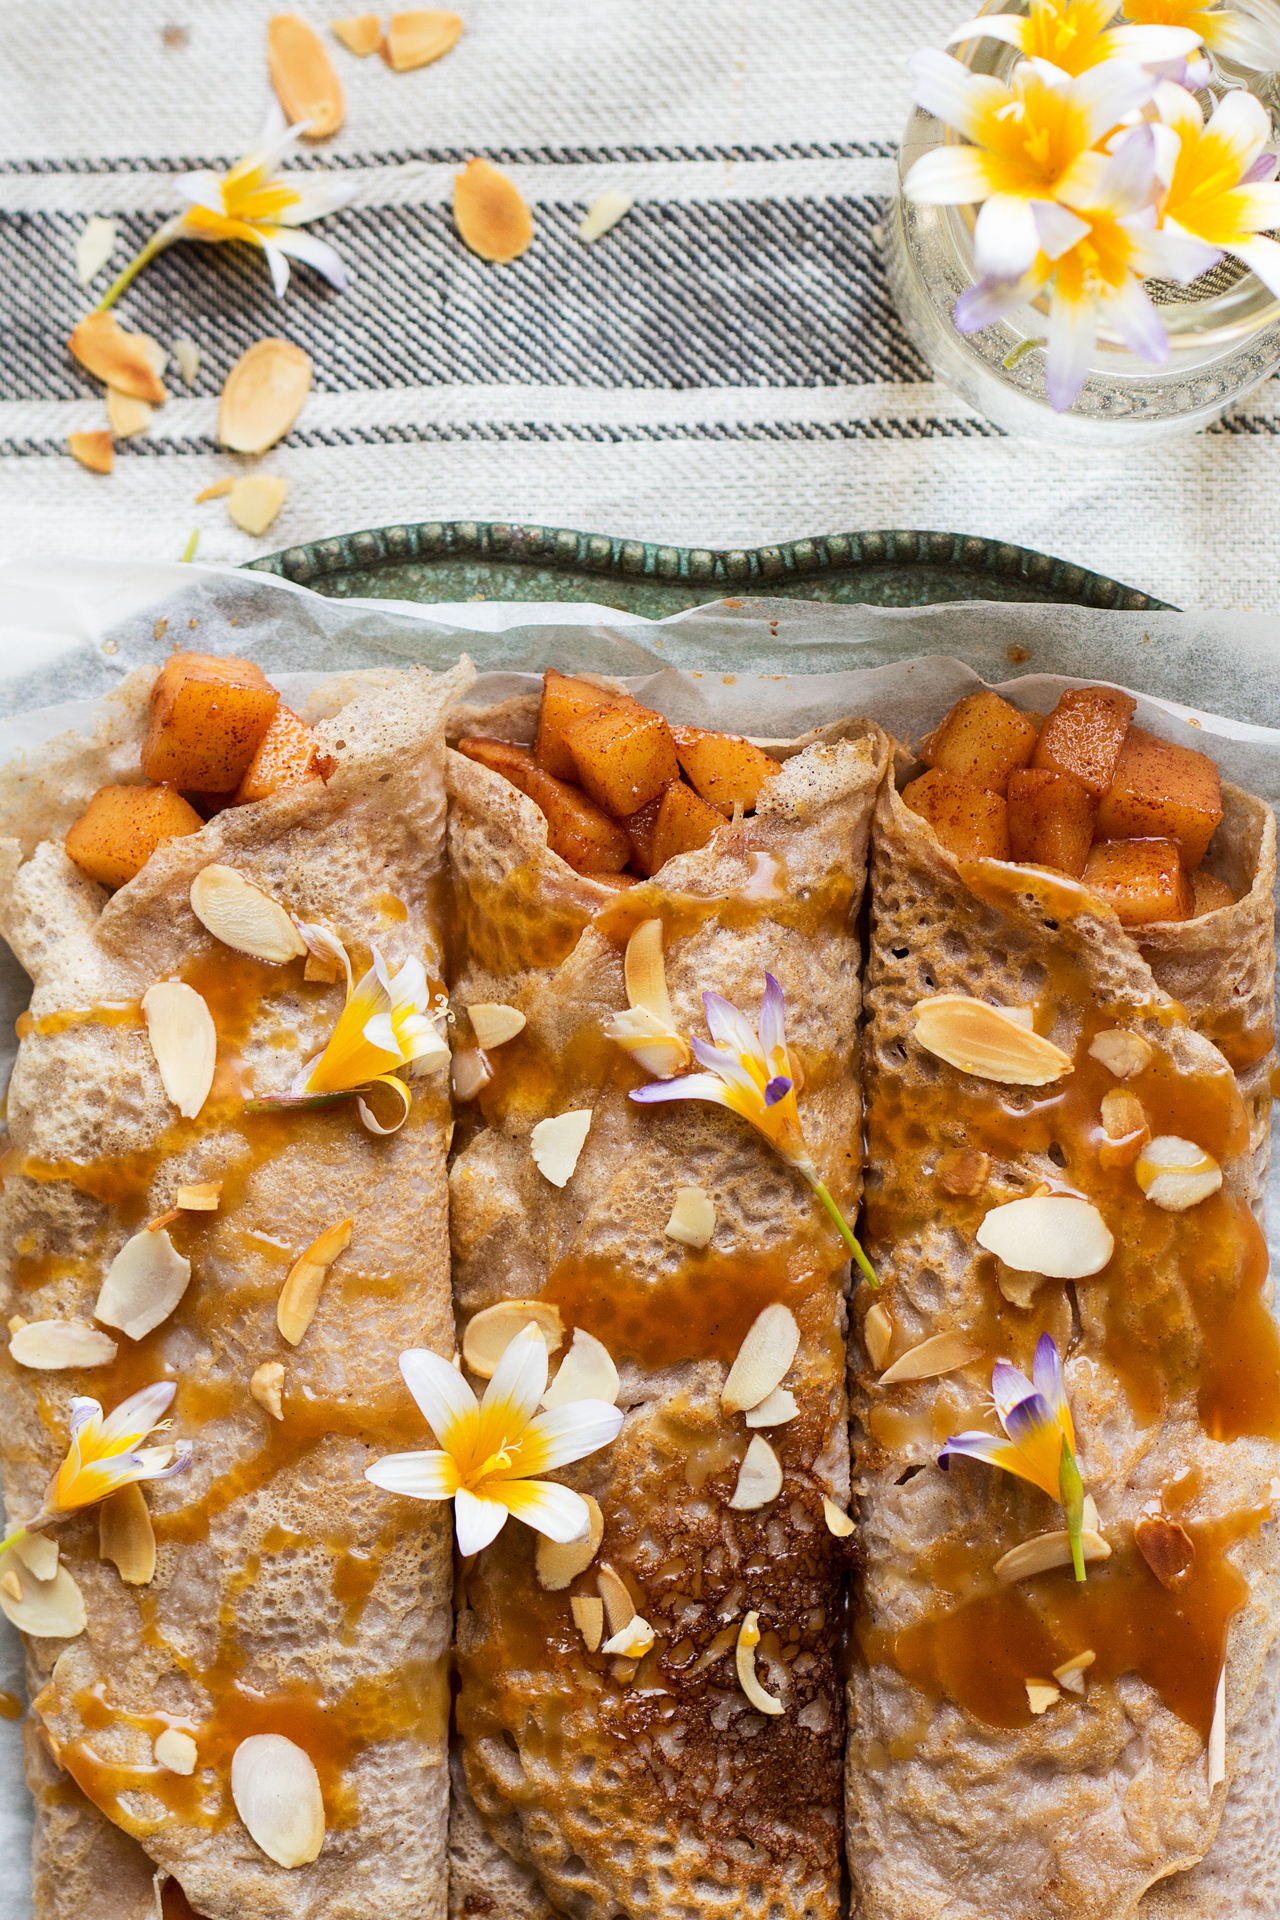 Eggless crêpes with cinnamon apples and caramel - Lazy Cat Kitchen